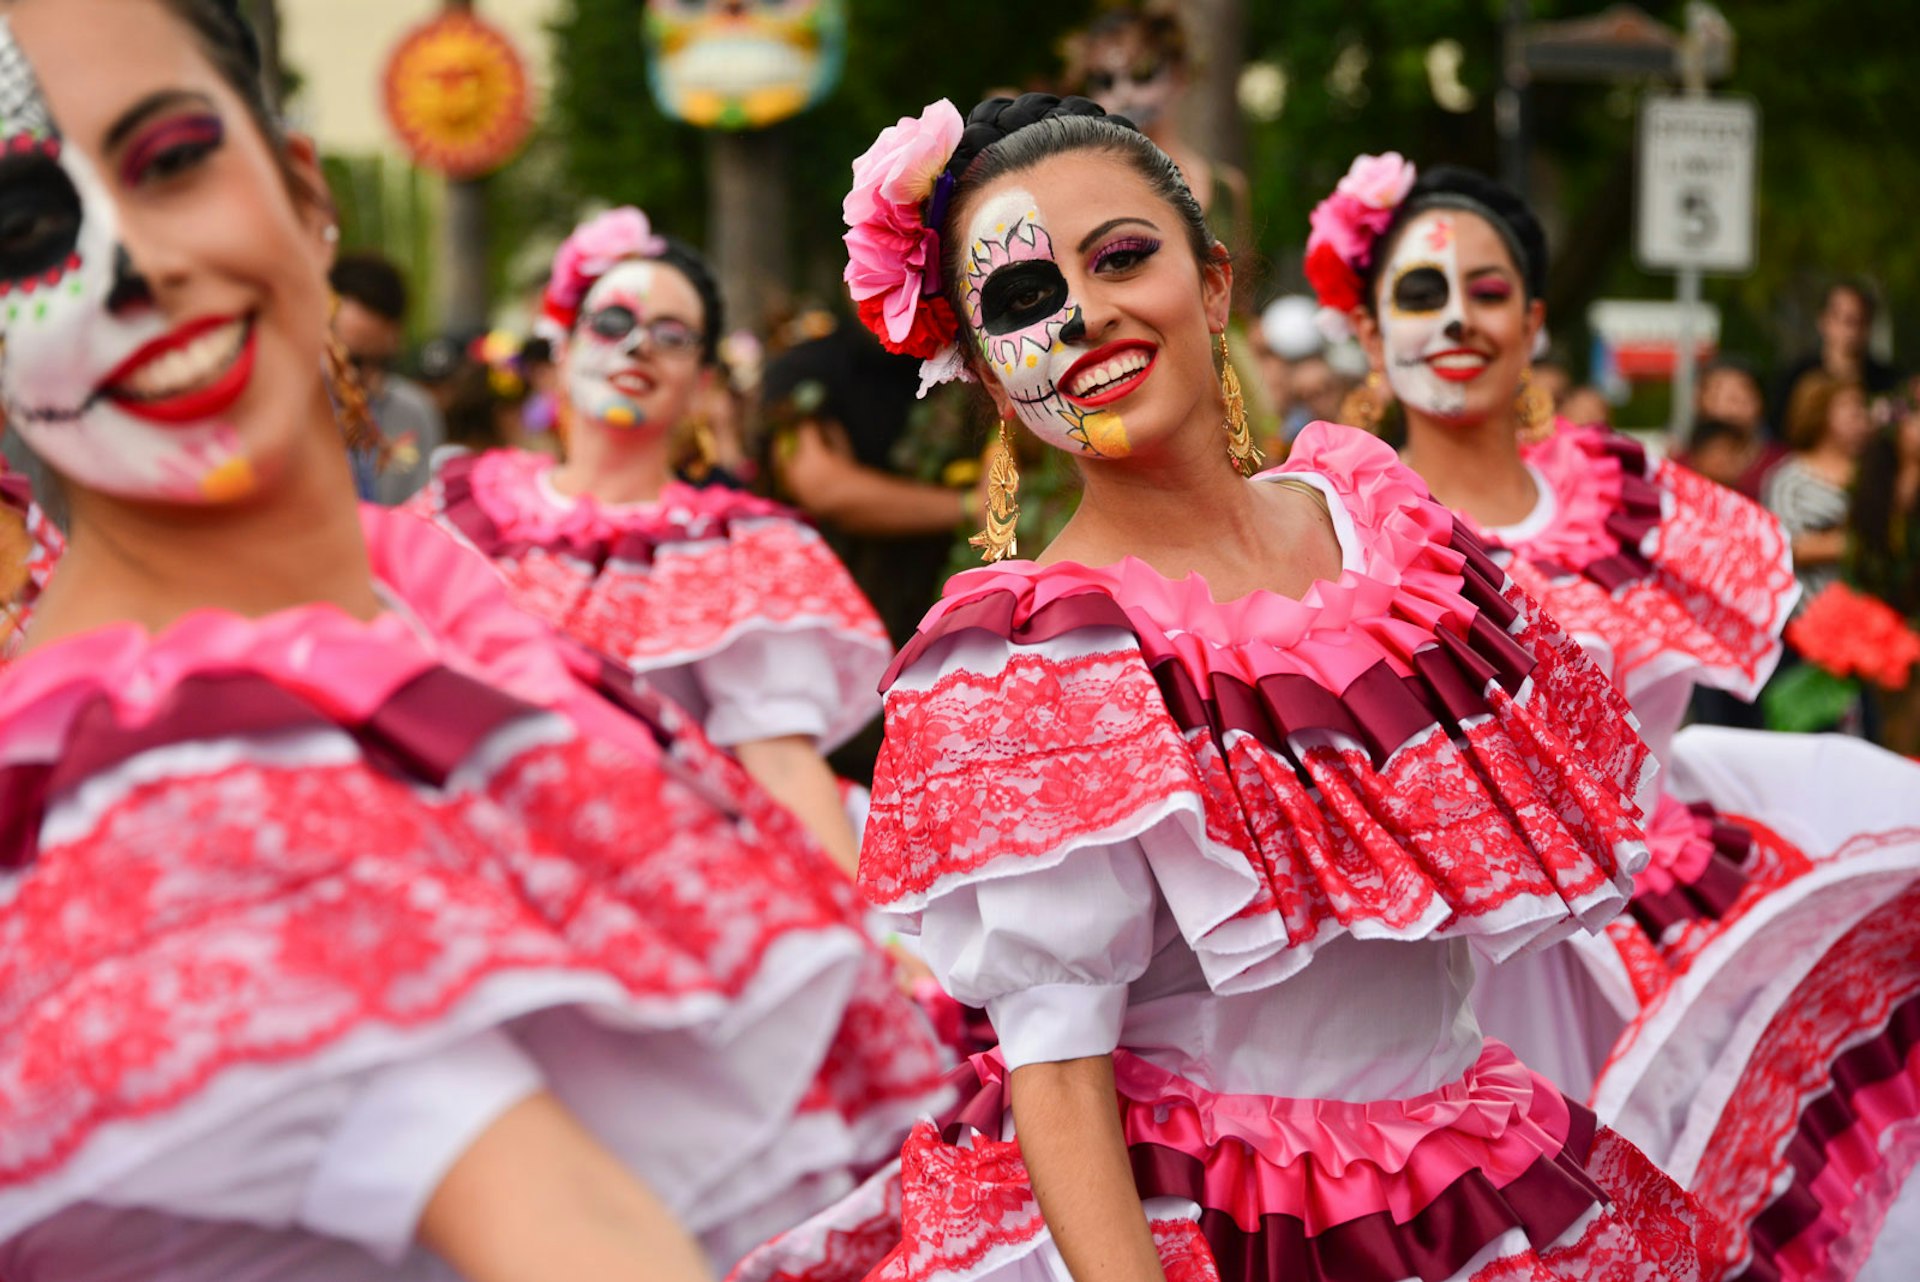 Women dance in pink and red traditional dresses their faces painted in the calavera style